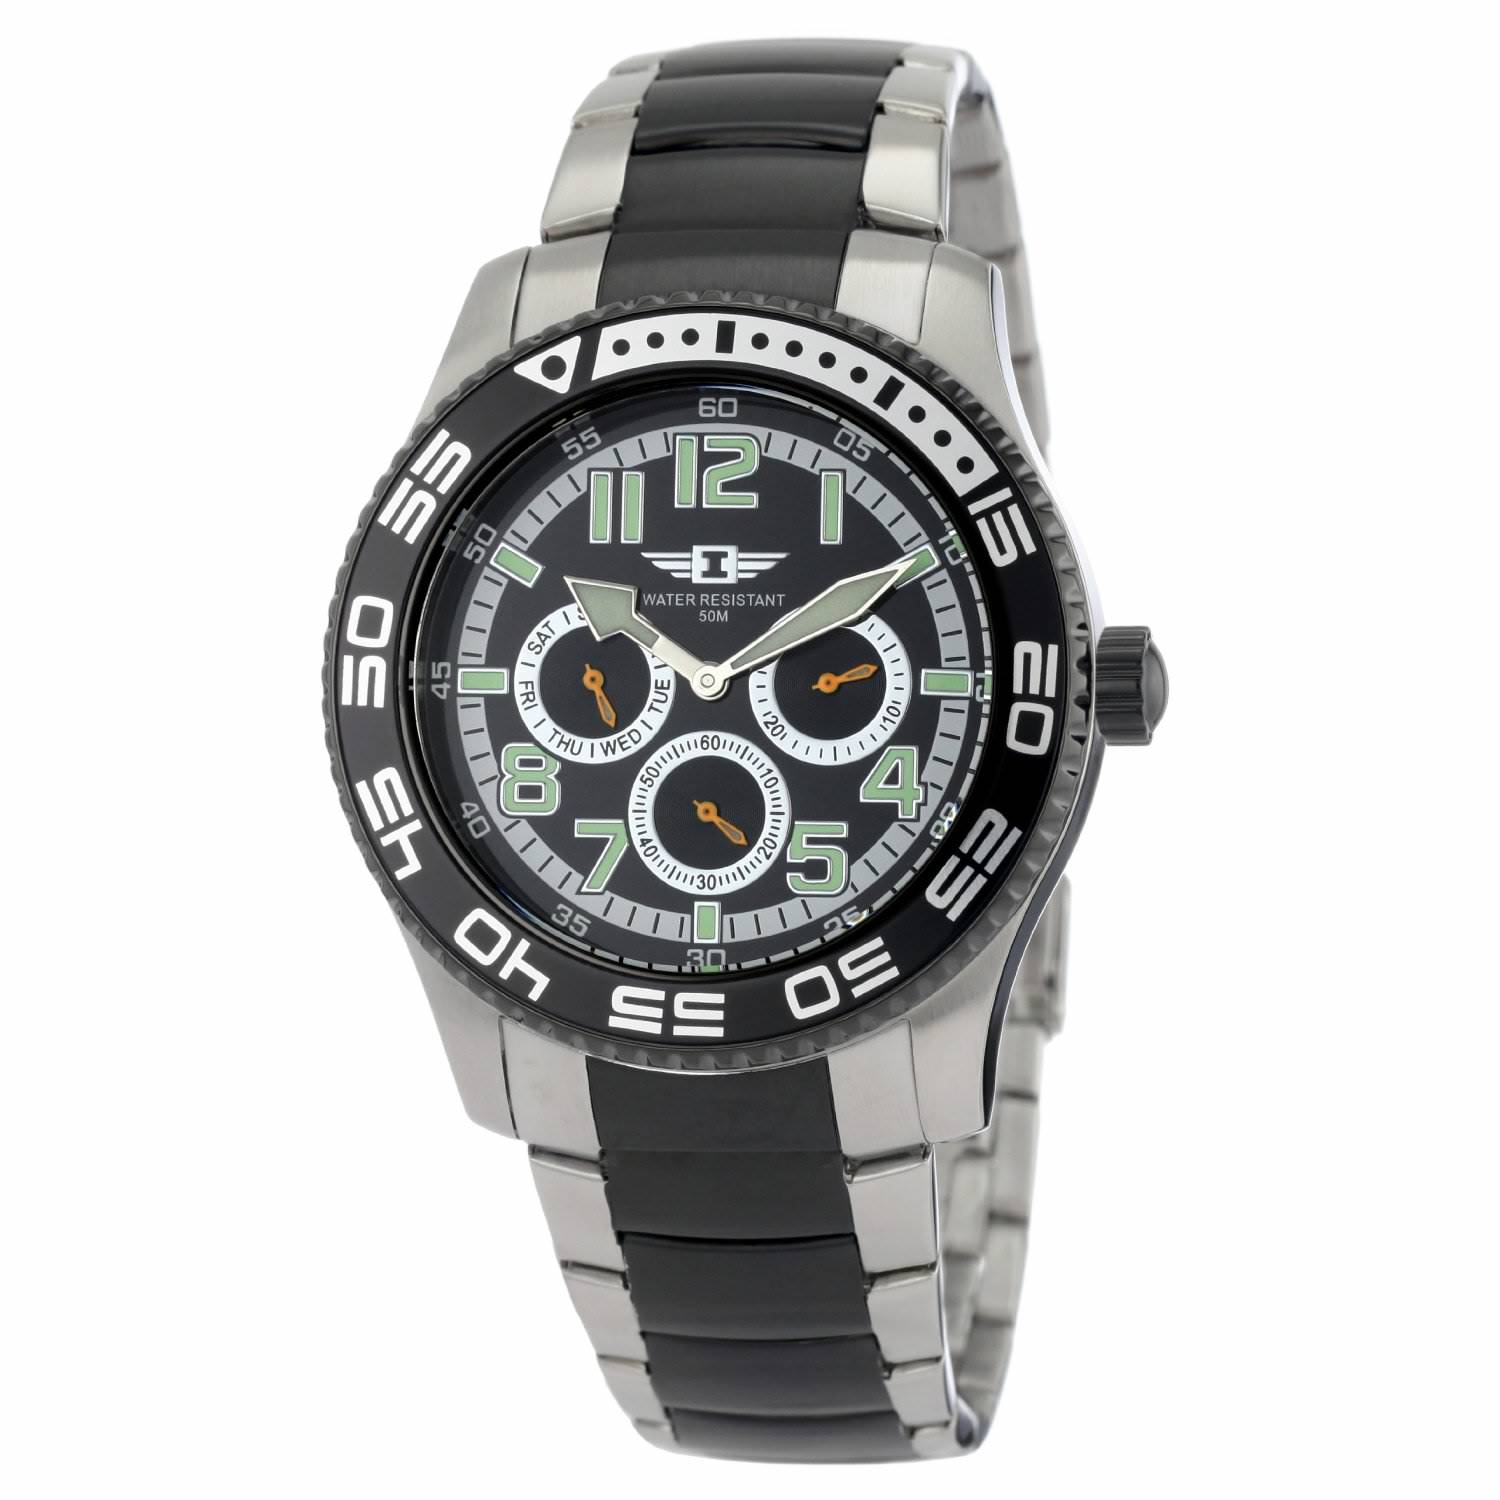 SALE : INVICTA STAINLESS STEEL MENS WATCH